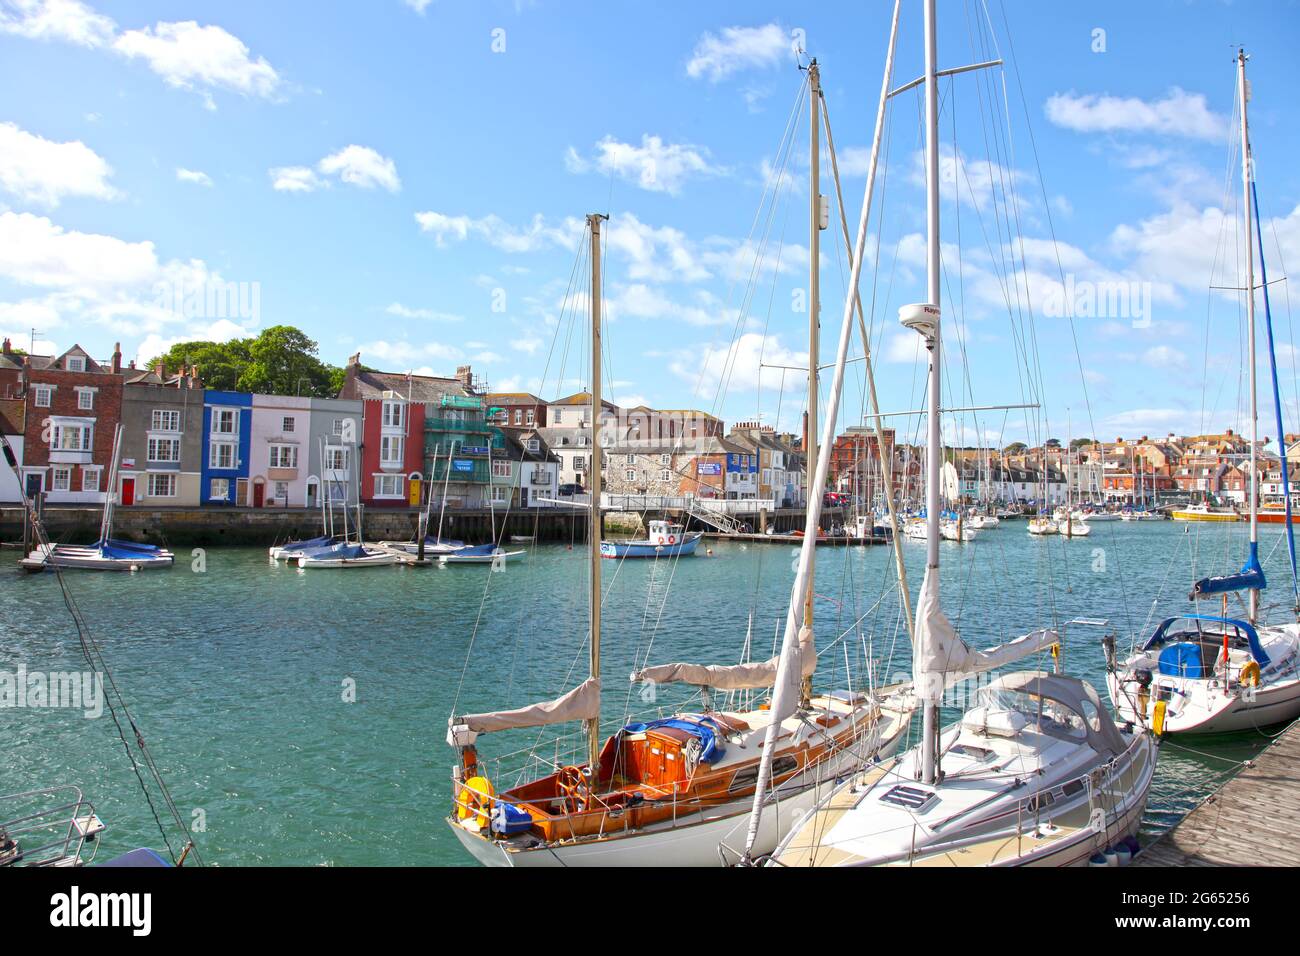 Boats on the river at Weymouth Harbour in Dorset, England. Stock Photo